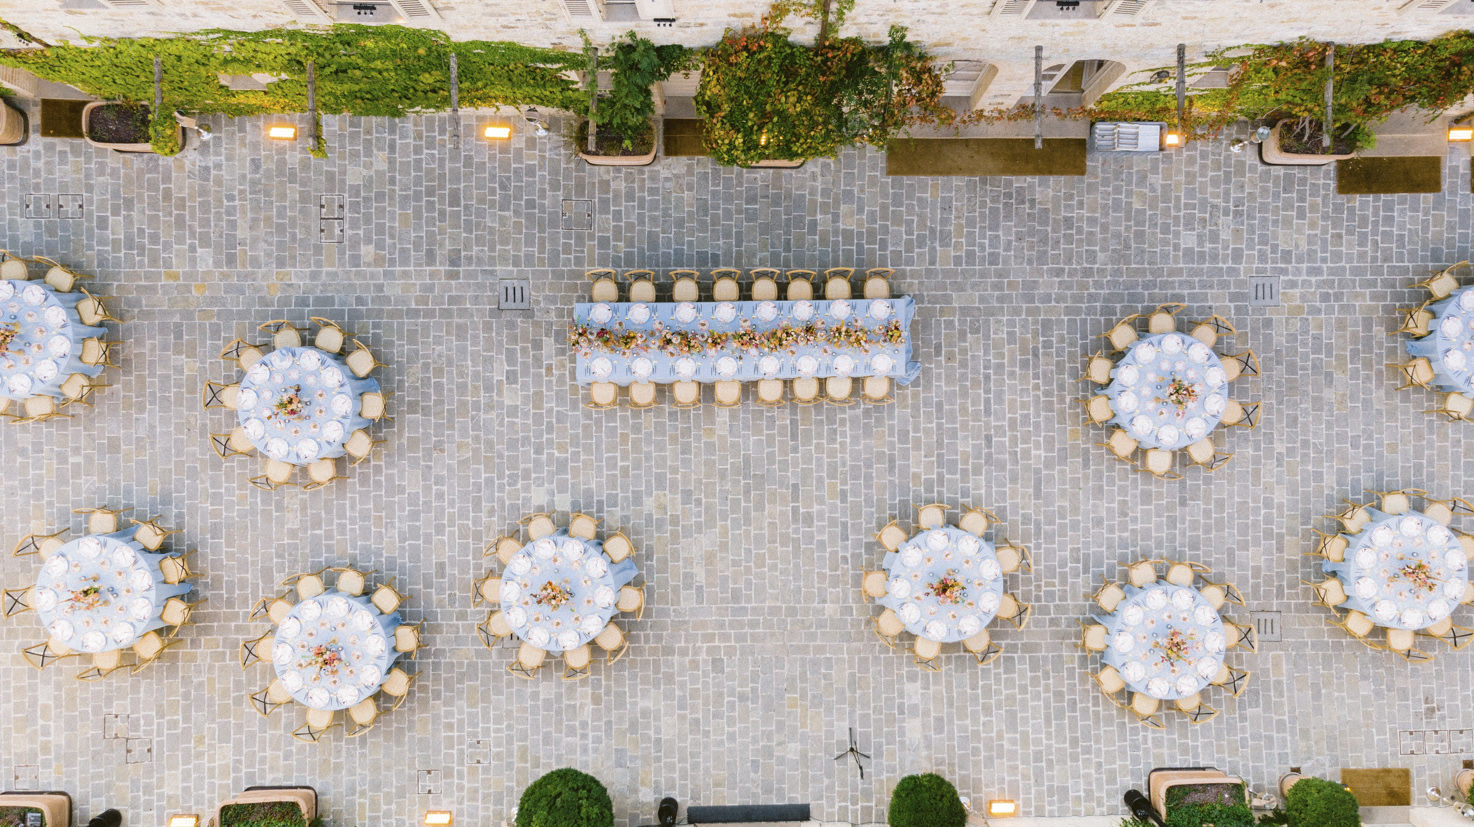 Aerial view of the wedding banquet